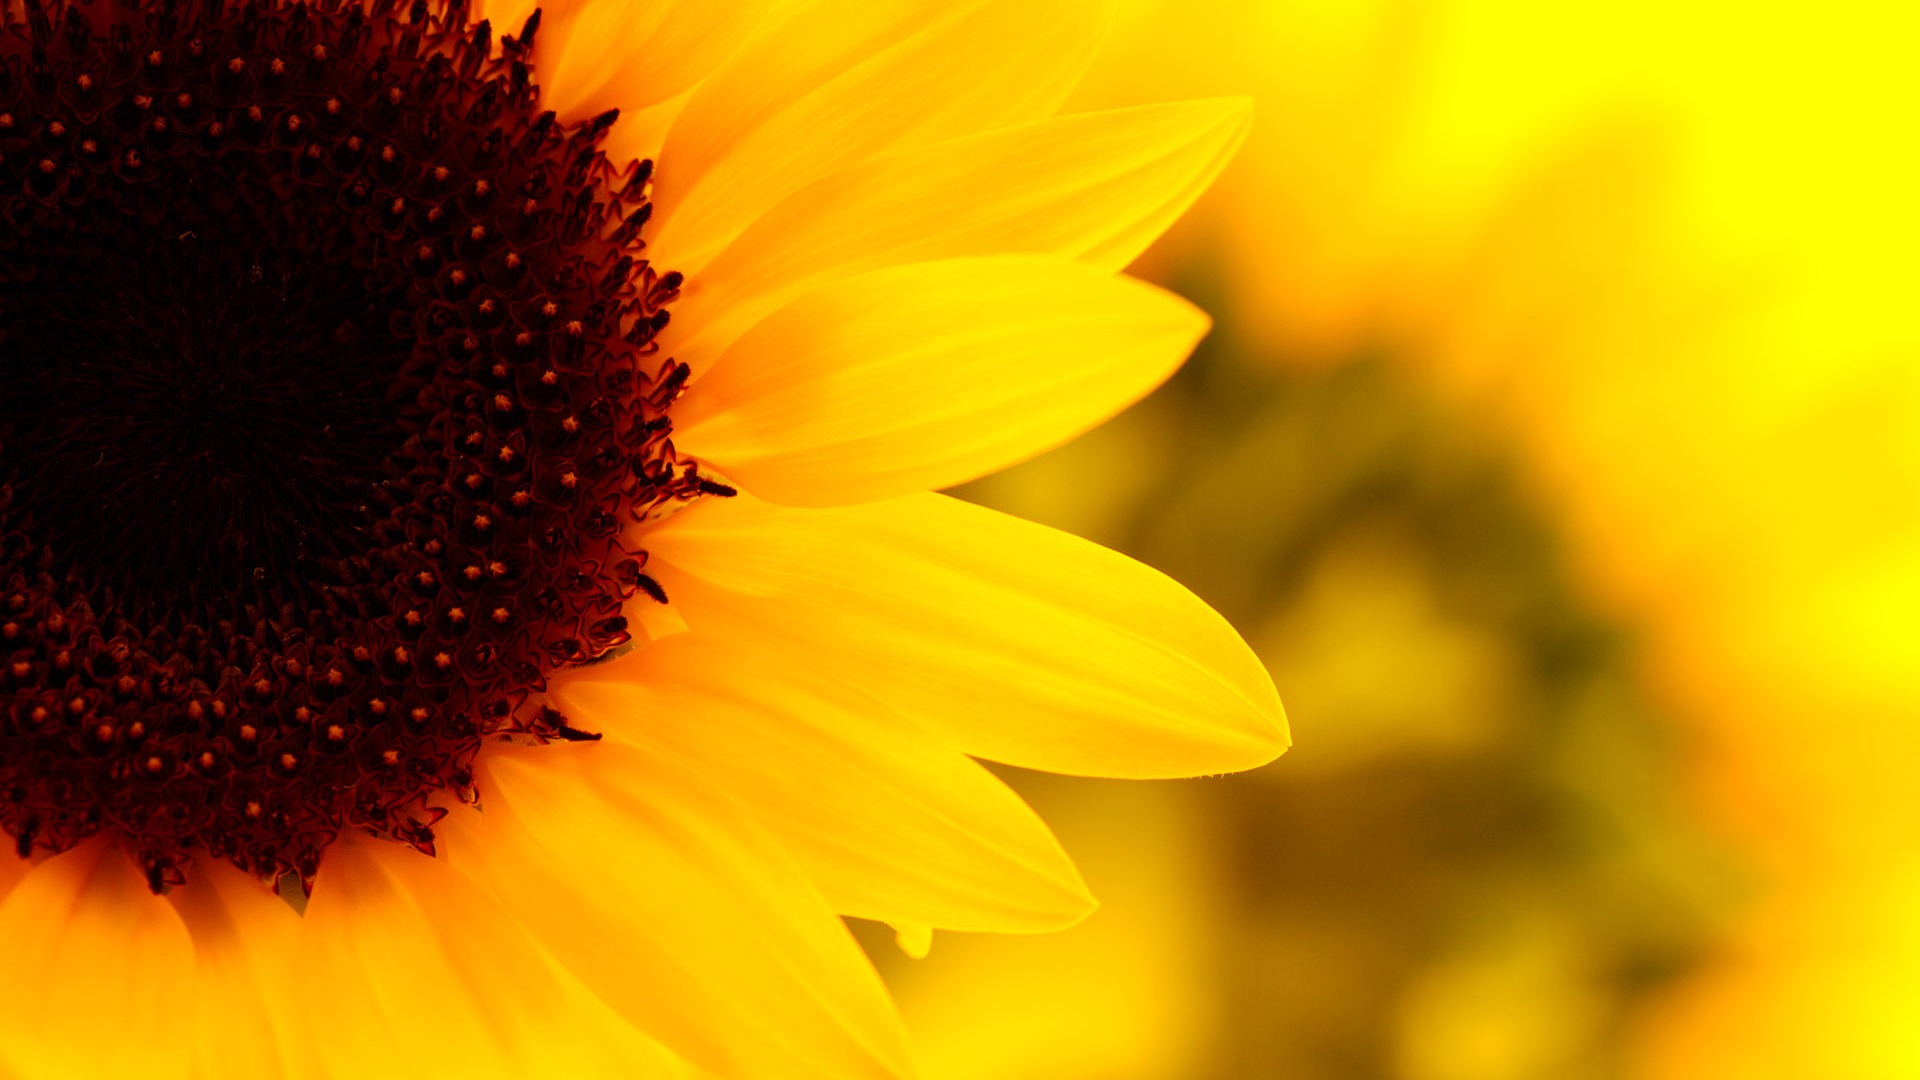 Sunny sunflower photo HD Wallpapers #10 - 1920x1080